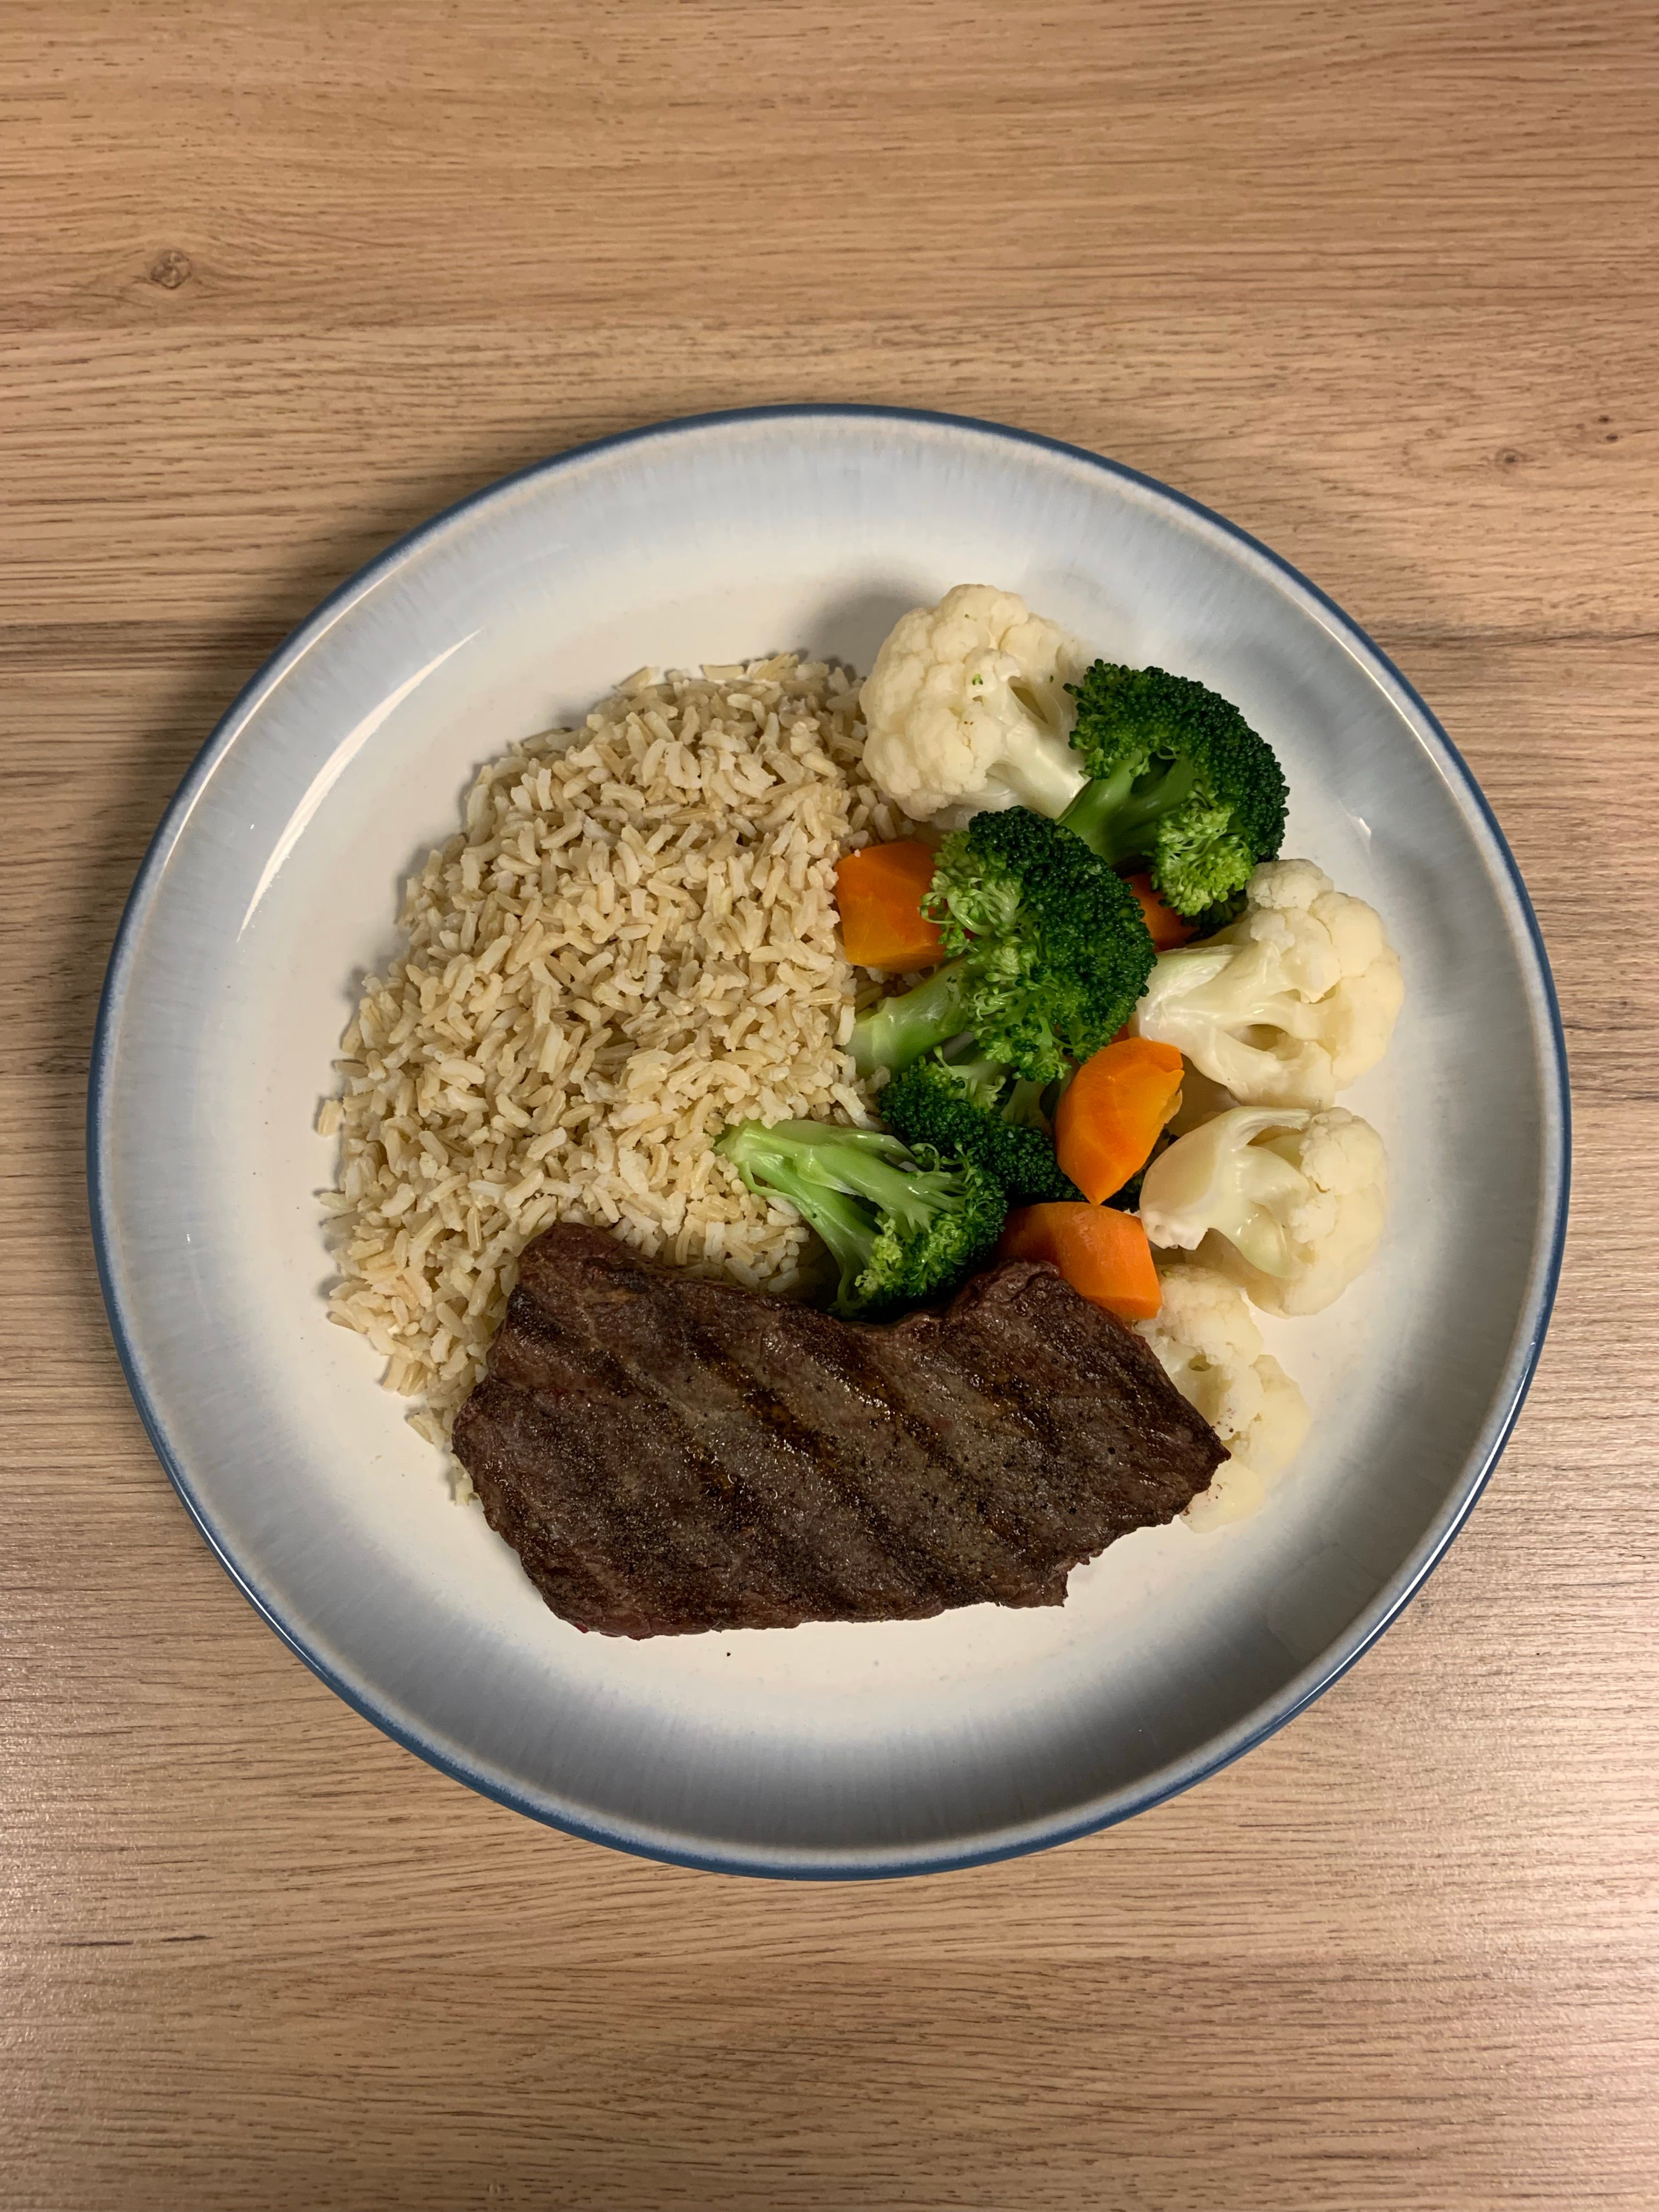 Steak, Brown Rice, Mixed Vegetables Meal